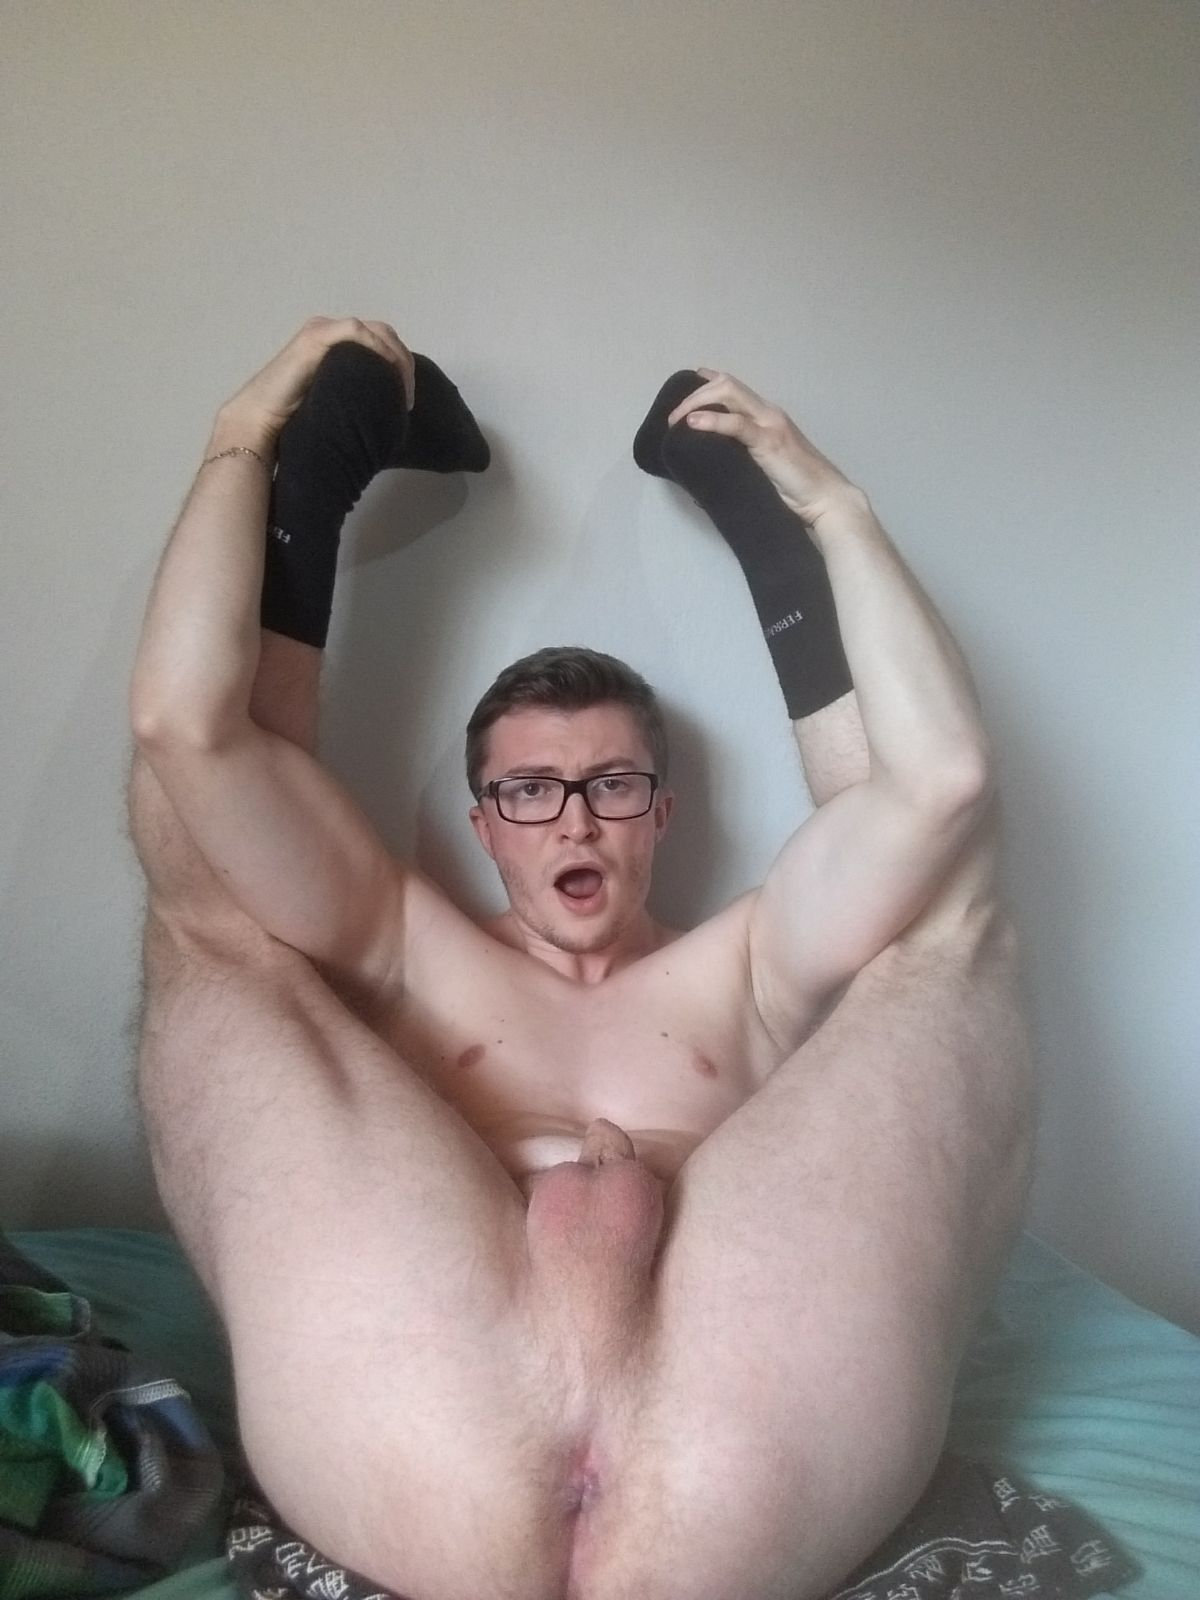 Watch the Photo by BubbleButtSir with the username @BubbleButtSir, who is a verified user, posted on July 8, 2019 and the text says 'FUCK THE NERD'